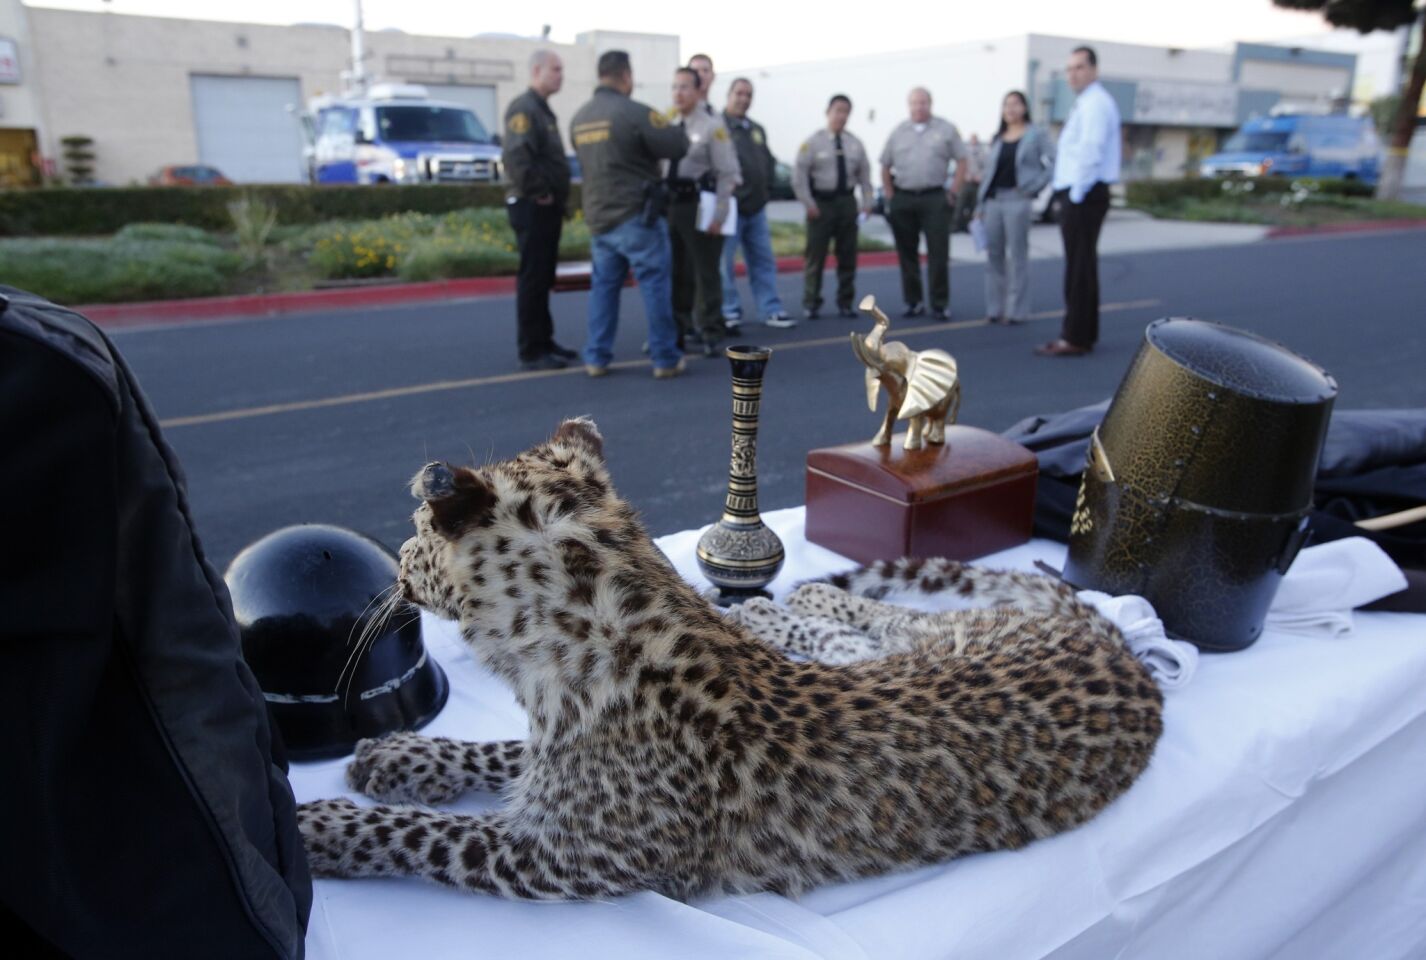 A mounted snow leopard, valued by the owner at $250,000, is on display with other stolen items in front of the city of Industry Sheriff's Station on Dec. 11. The items were stolen from a home in La Habra Heights and 16 teenagers were arrested in the Nov. 23.